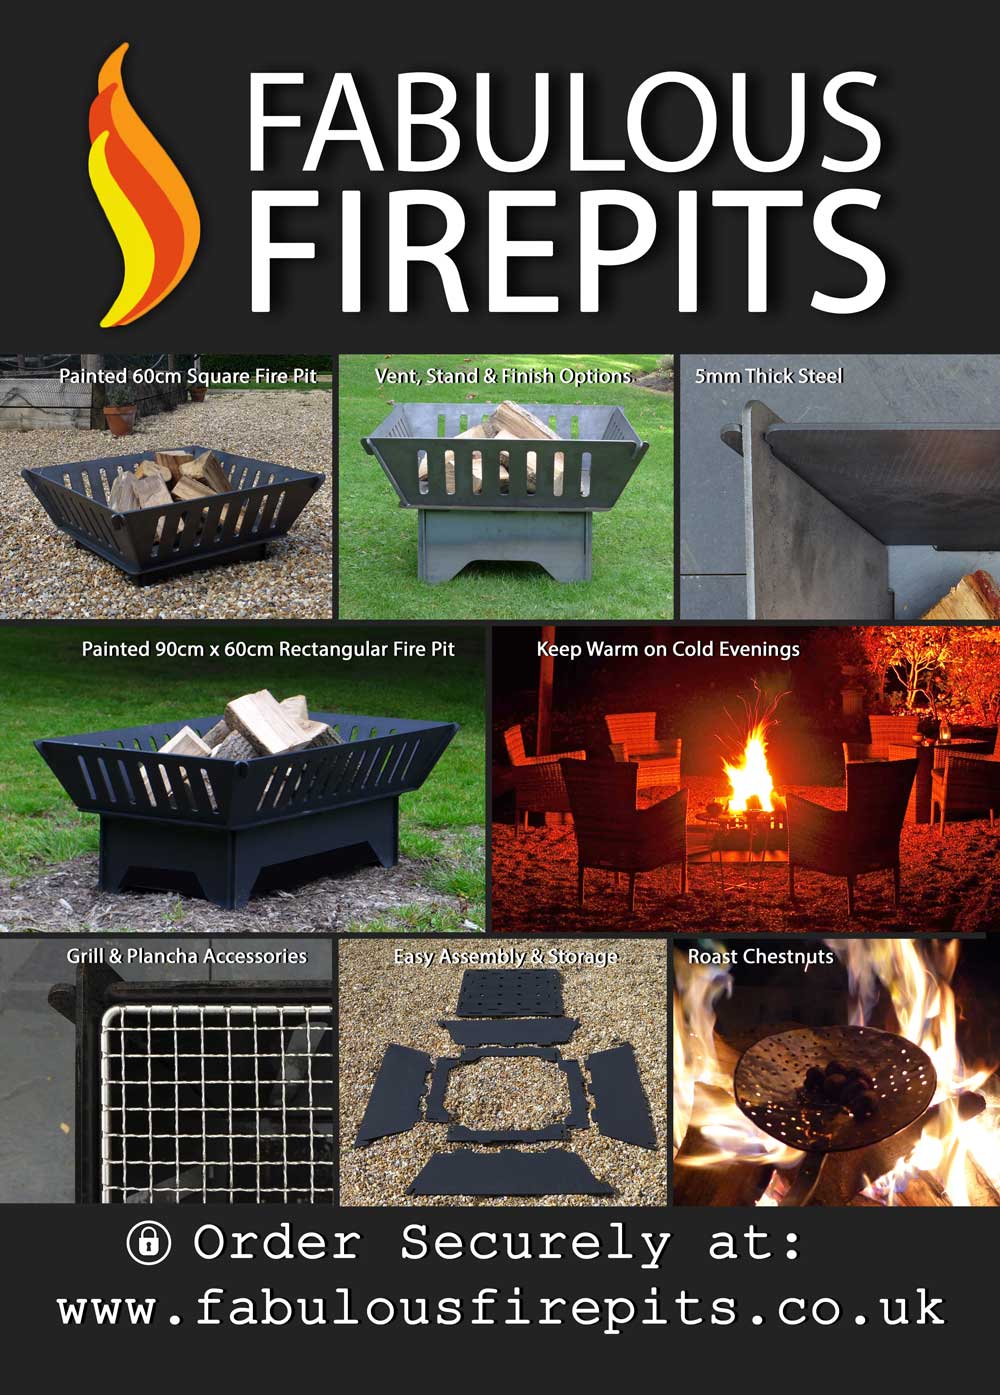 How To Choose A Fire Pit Fabulous, Are Fire Pits Dangerous